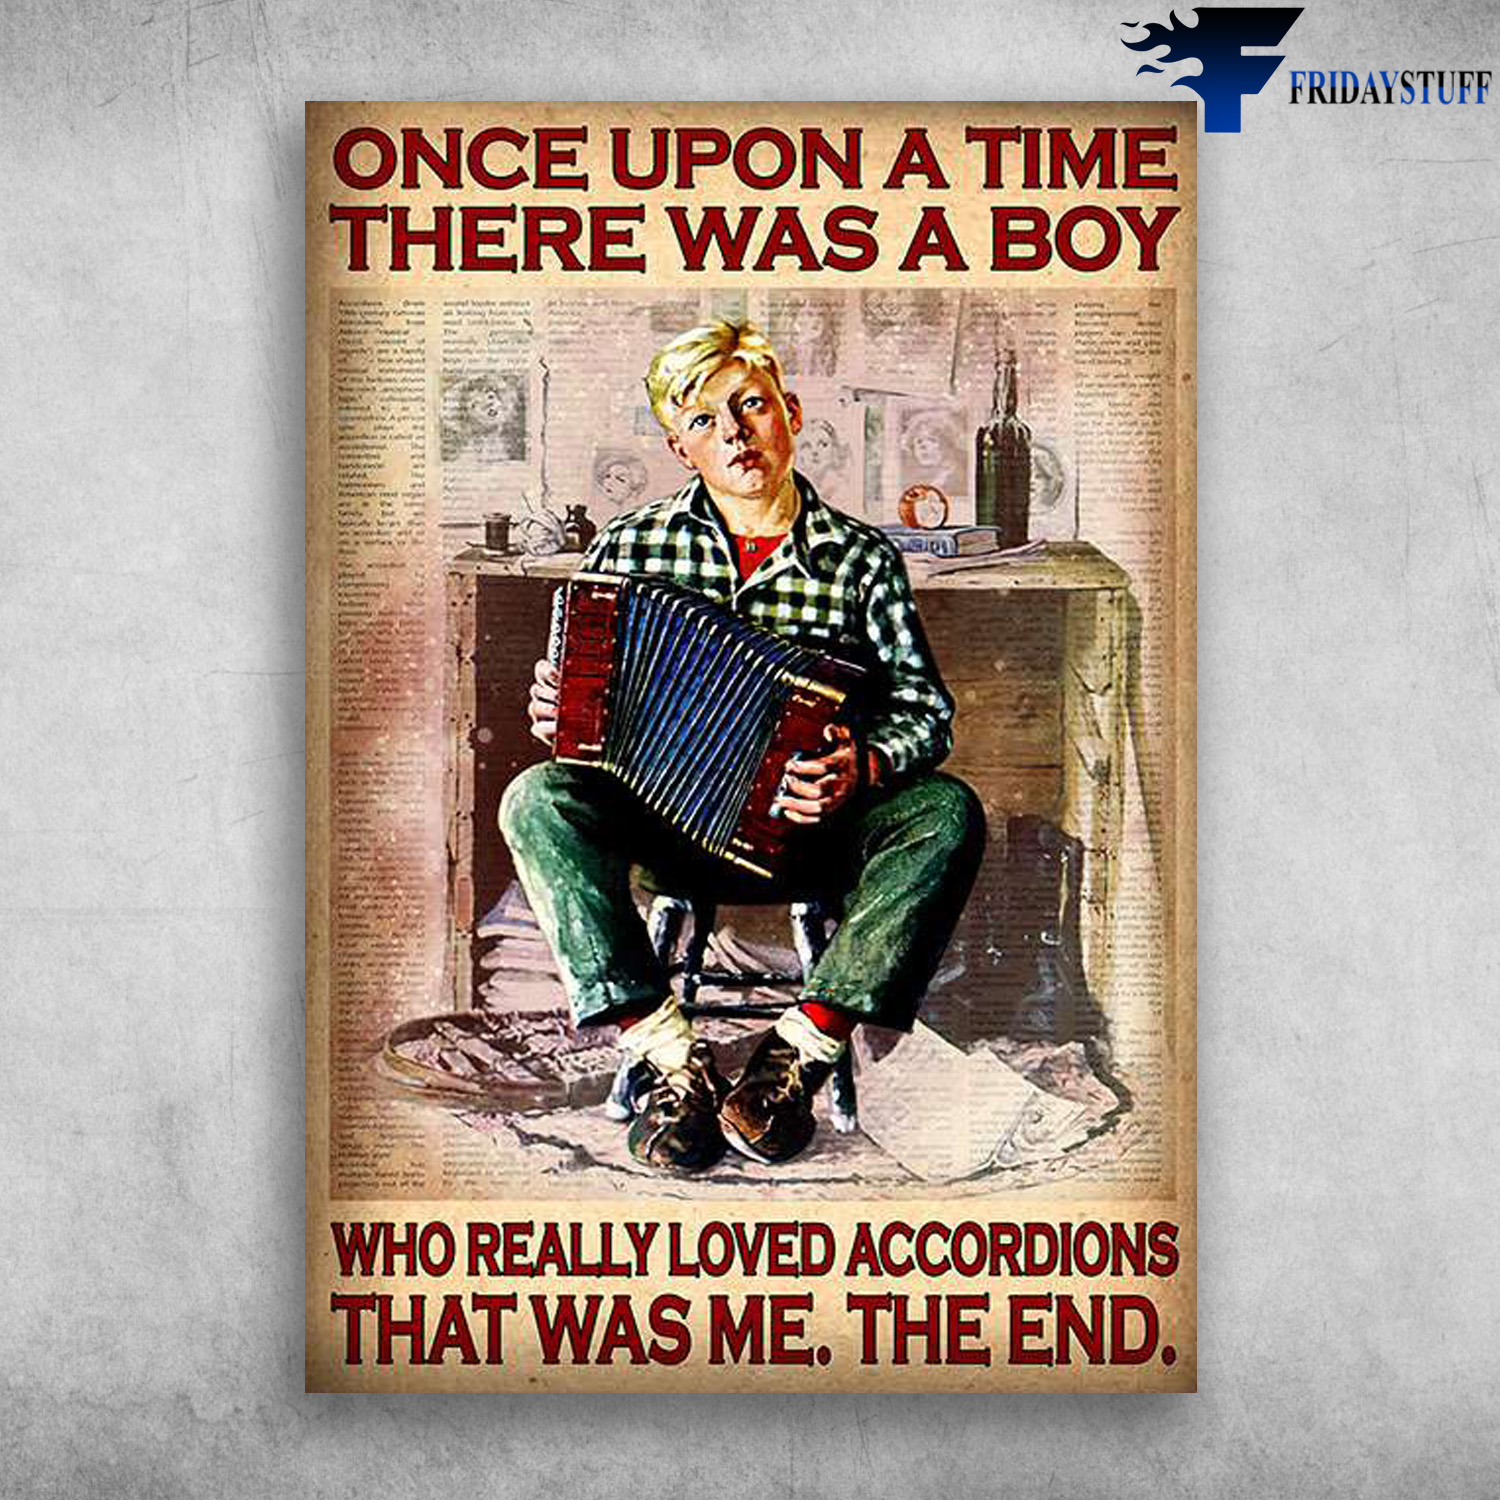 Boy Accordions - Once Upon A Time, There Was A Boy, Who Really Loved Accordions, That Was Me, The End